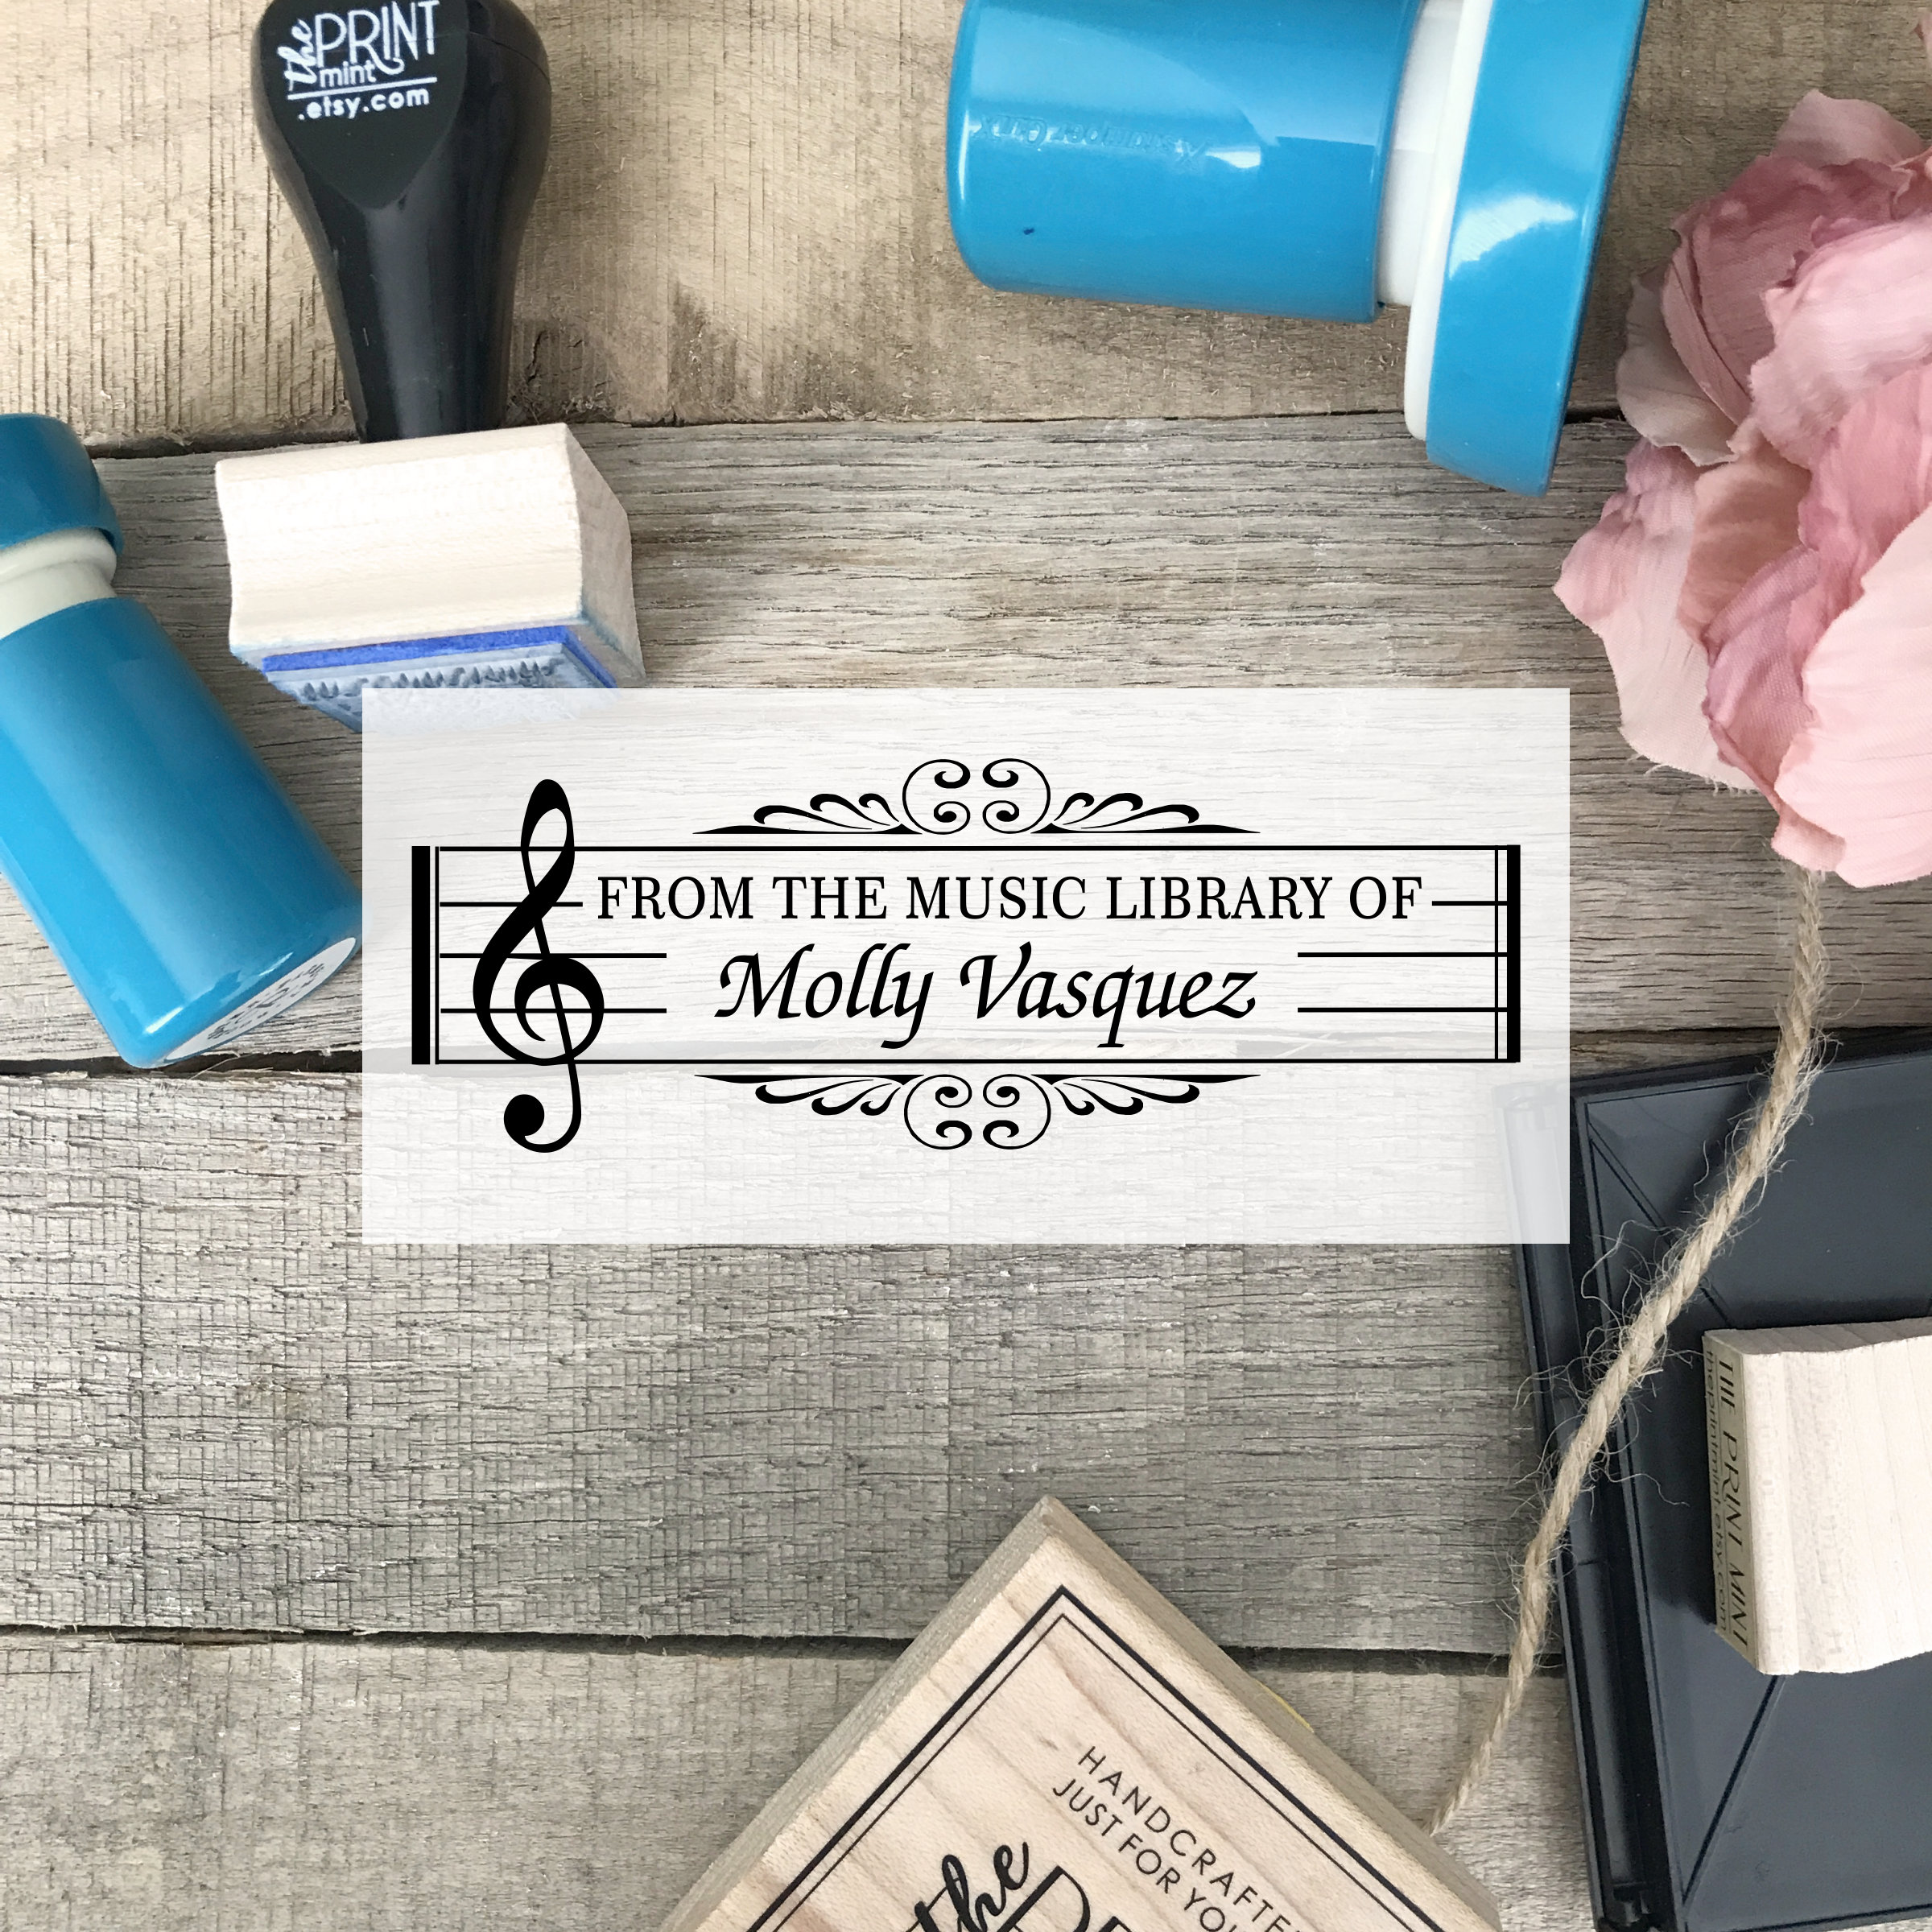 Personalized Birthday Stamp for Boys, Custom Rubber Stamps for Birthda –  PinkPueblo